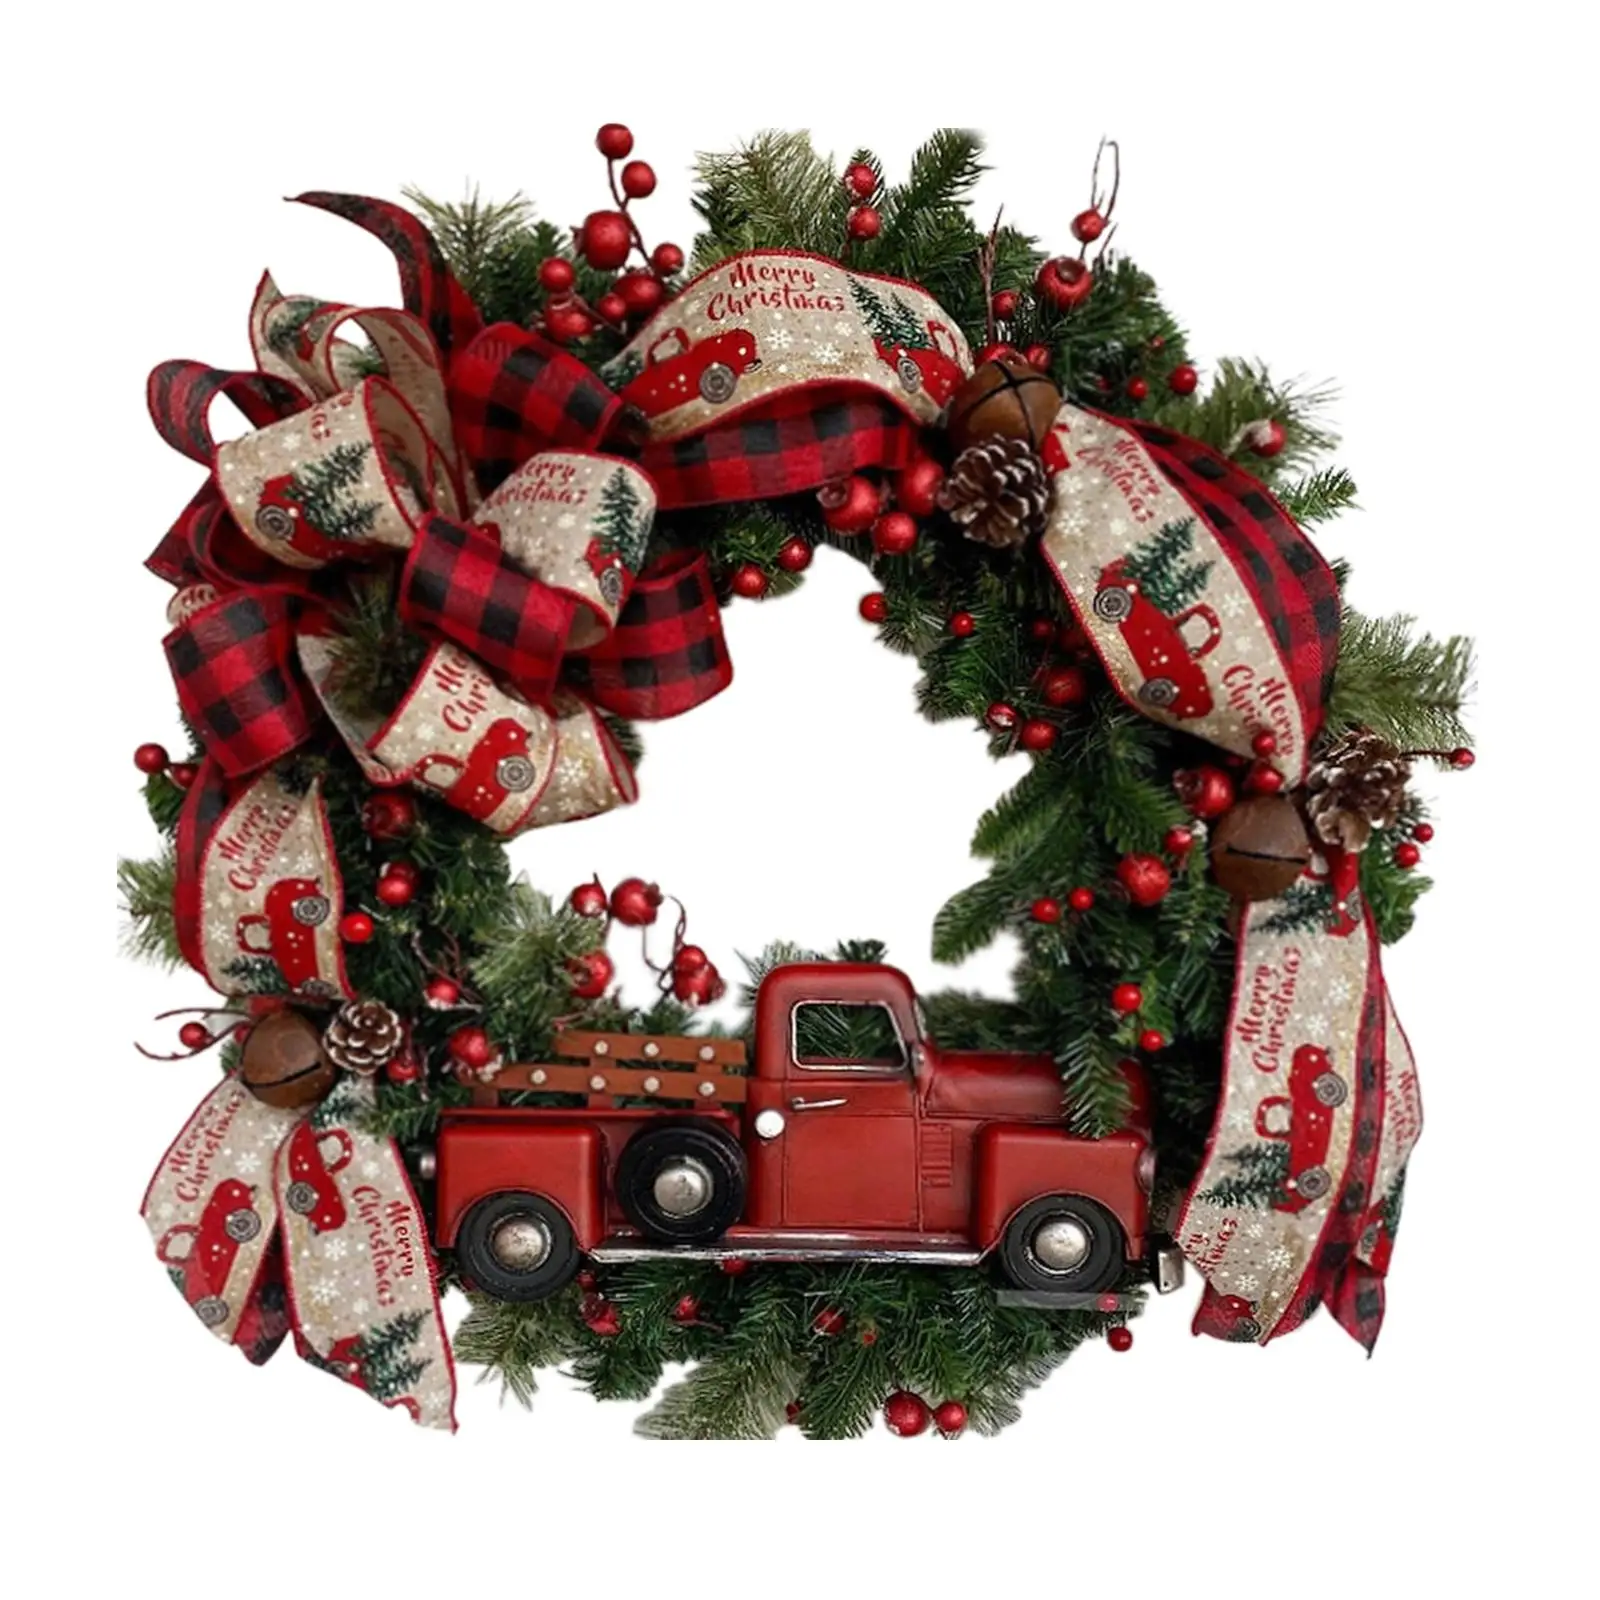 Christmas Wreath Red Car Decor Winter Wreath with Red Berries Decoration Green Leaves Wreath for Outdoor Garden Wall New Year